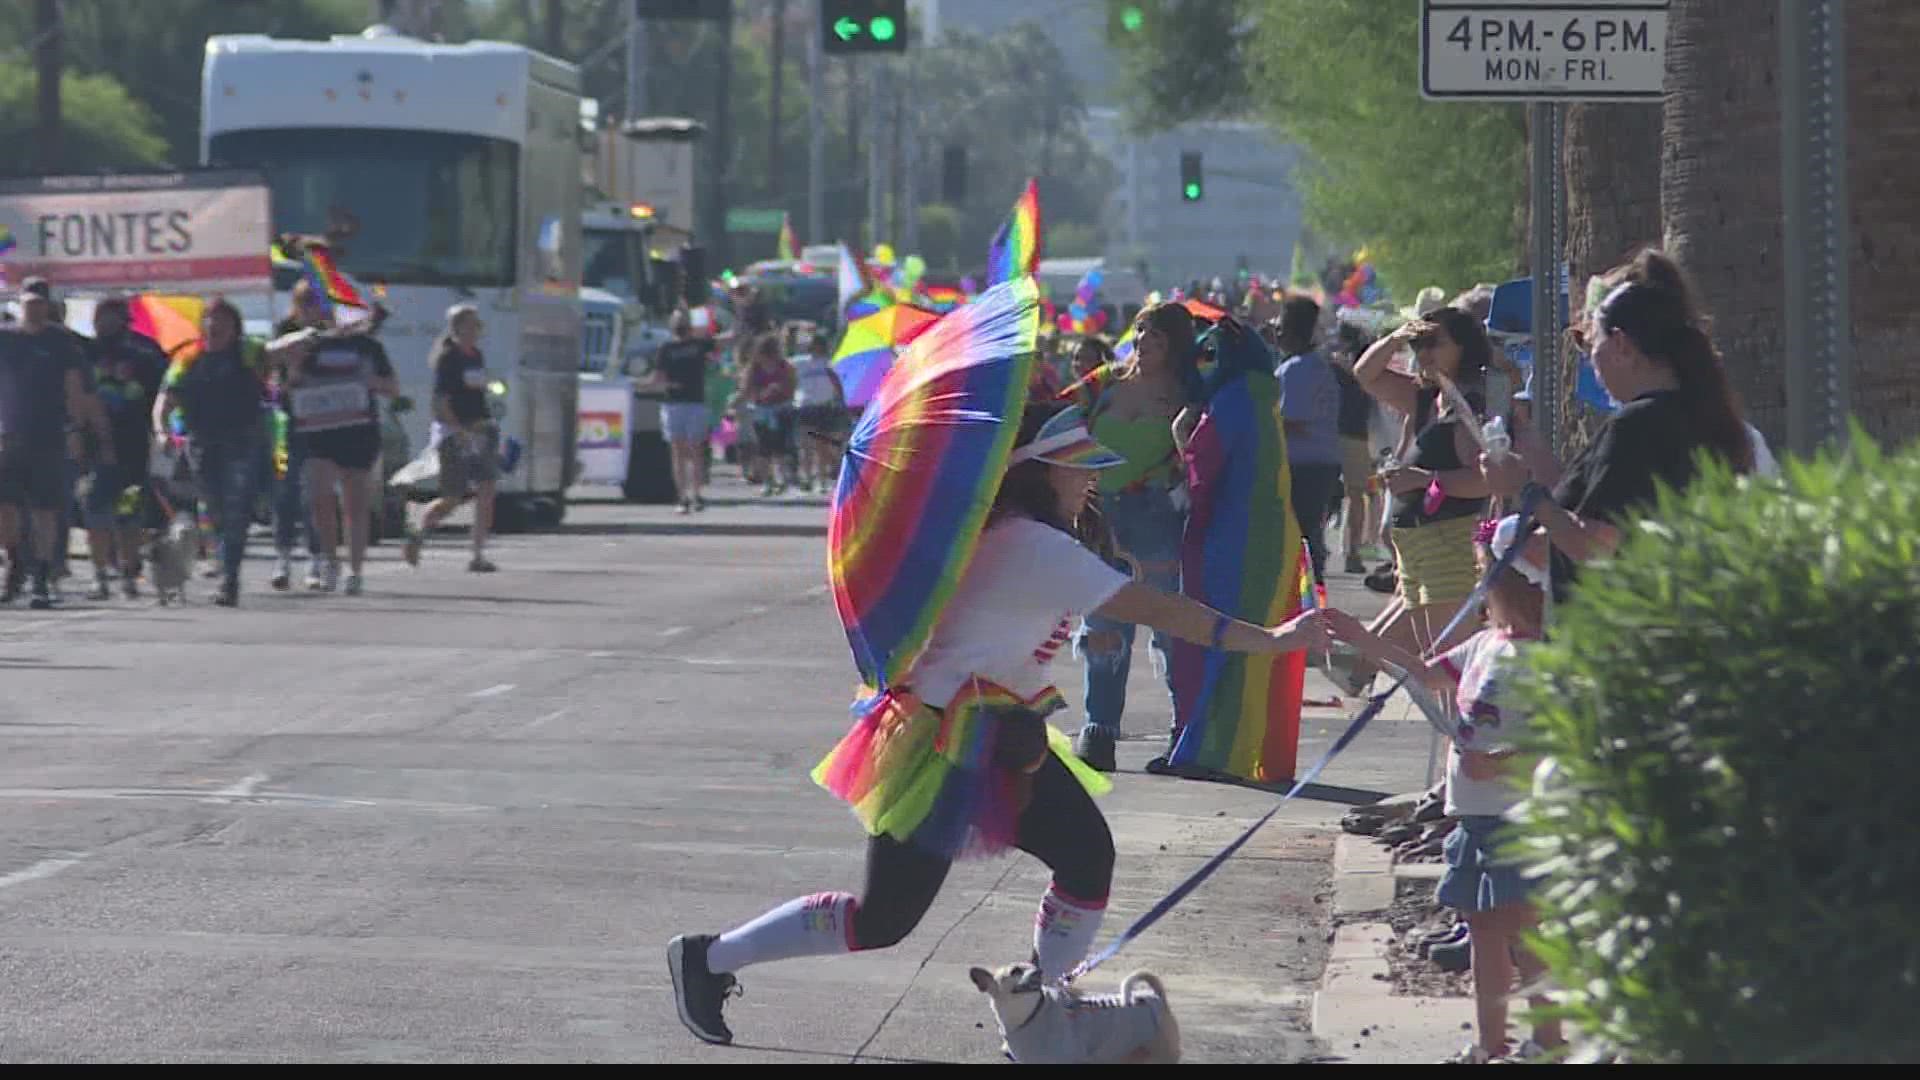 "For many in our community, it is the only truly safe space they experience throughout the year,"  said Executive Director of Phoenix Pride Mike Fornelli.